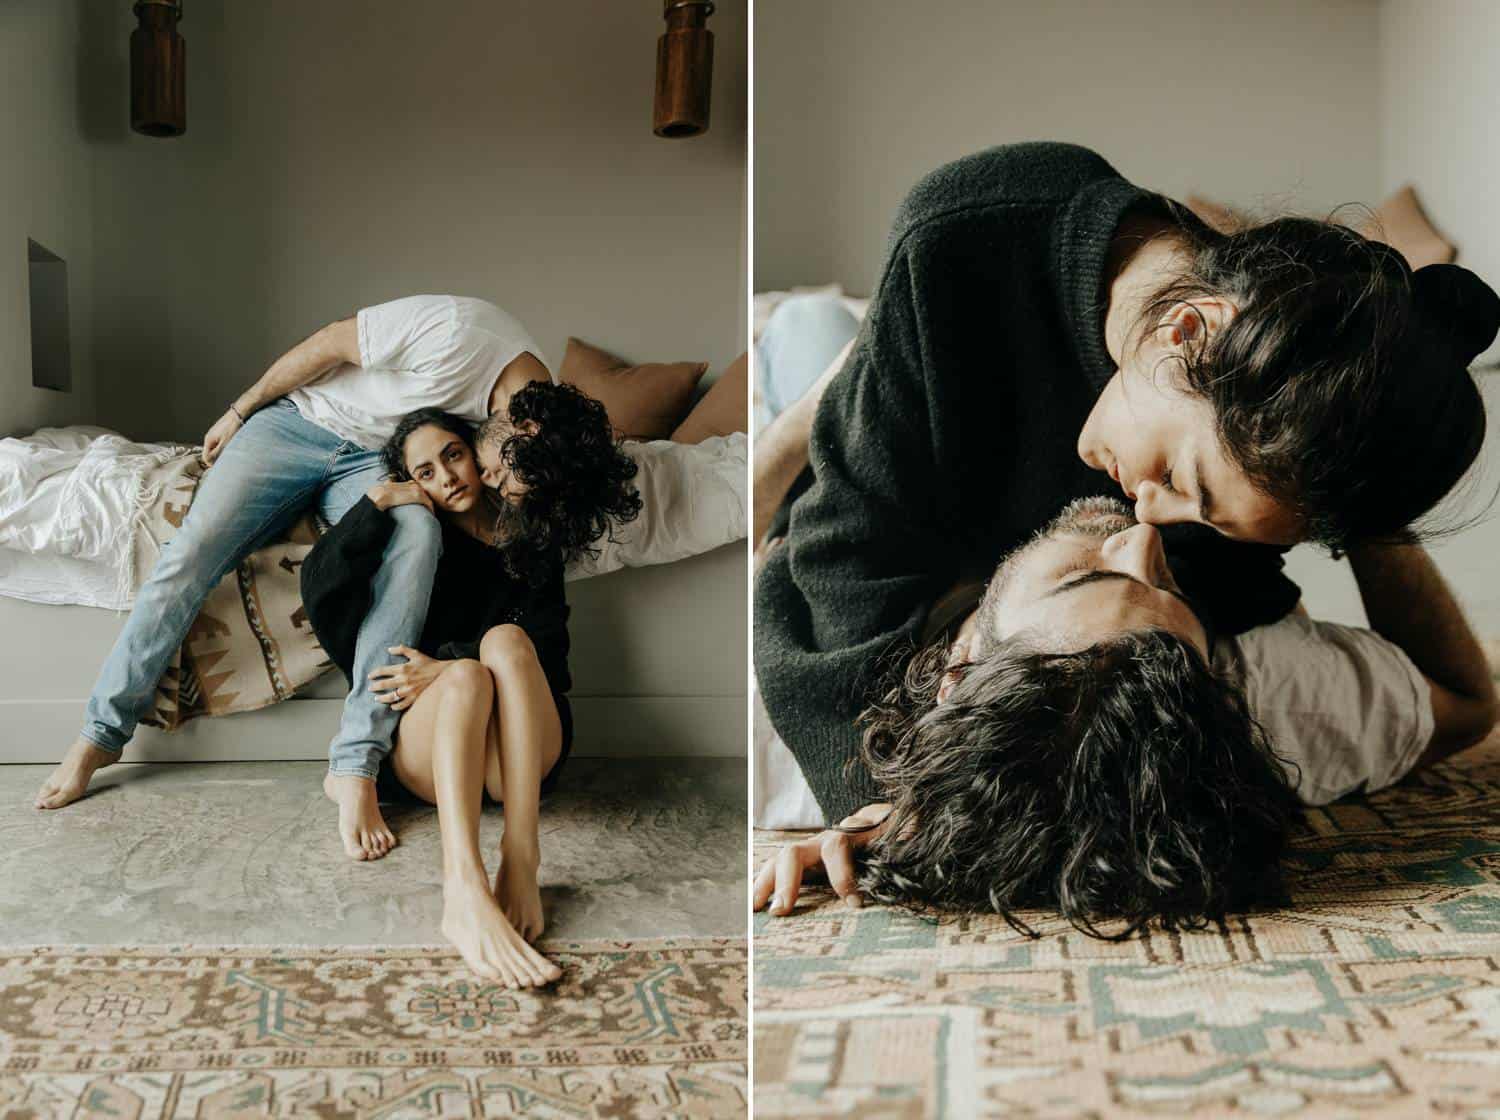 A dark-haired couple in casual clothing kisses on the floor and cuddles close on their bed for a low-key boudoir session in a minimalist space.